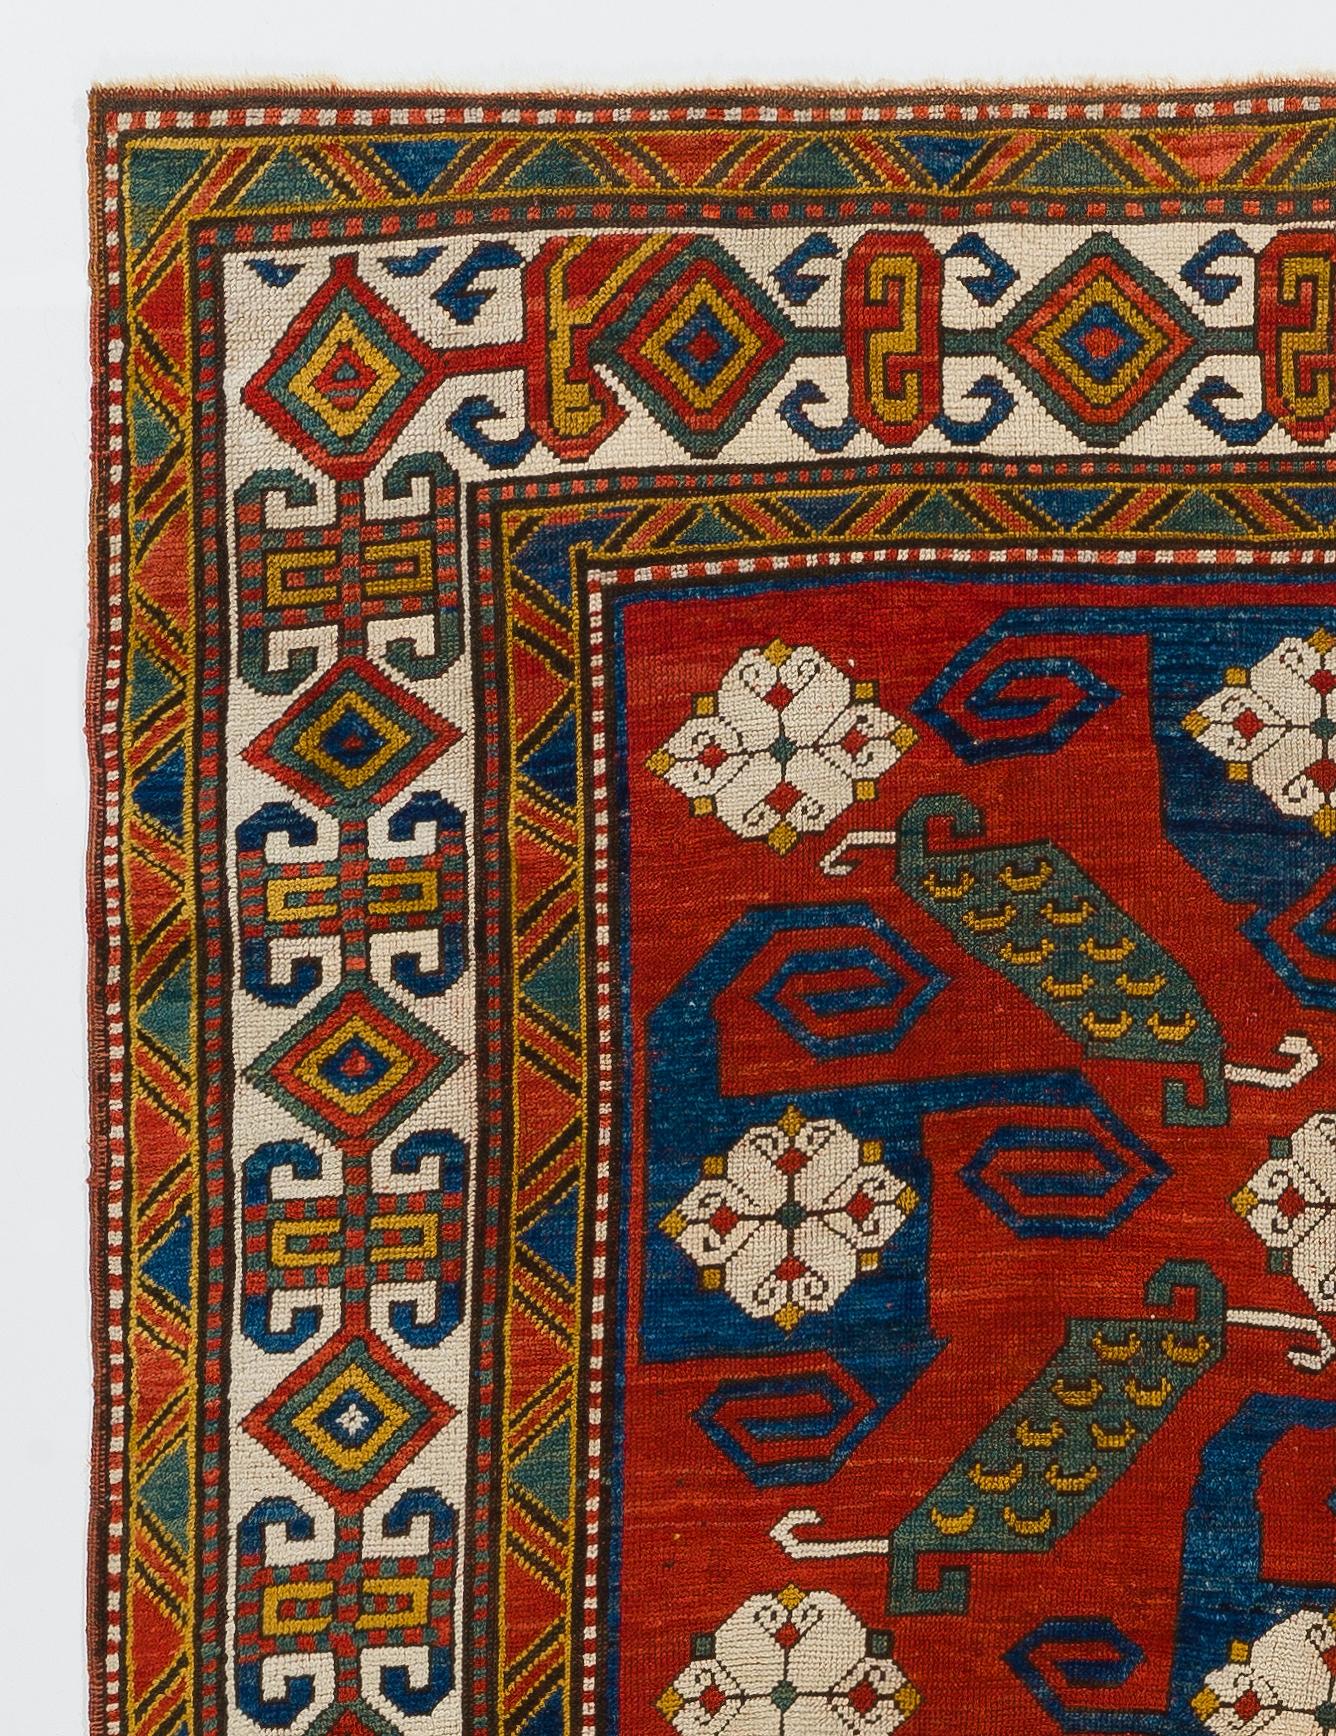 Rare antique Caucasian pinwheel Kazak rug in well preserved condition, original as found. All wool and natural dyes. 
Provenance: A private collection in the UK.
 